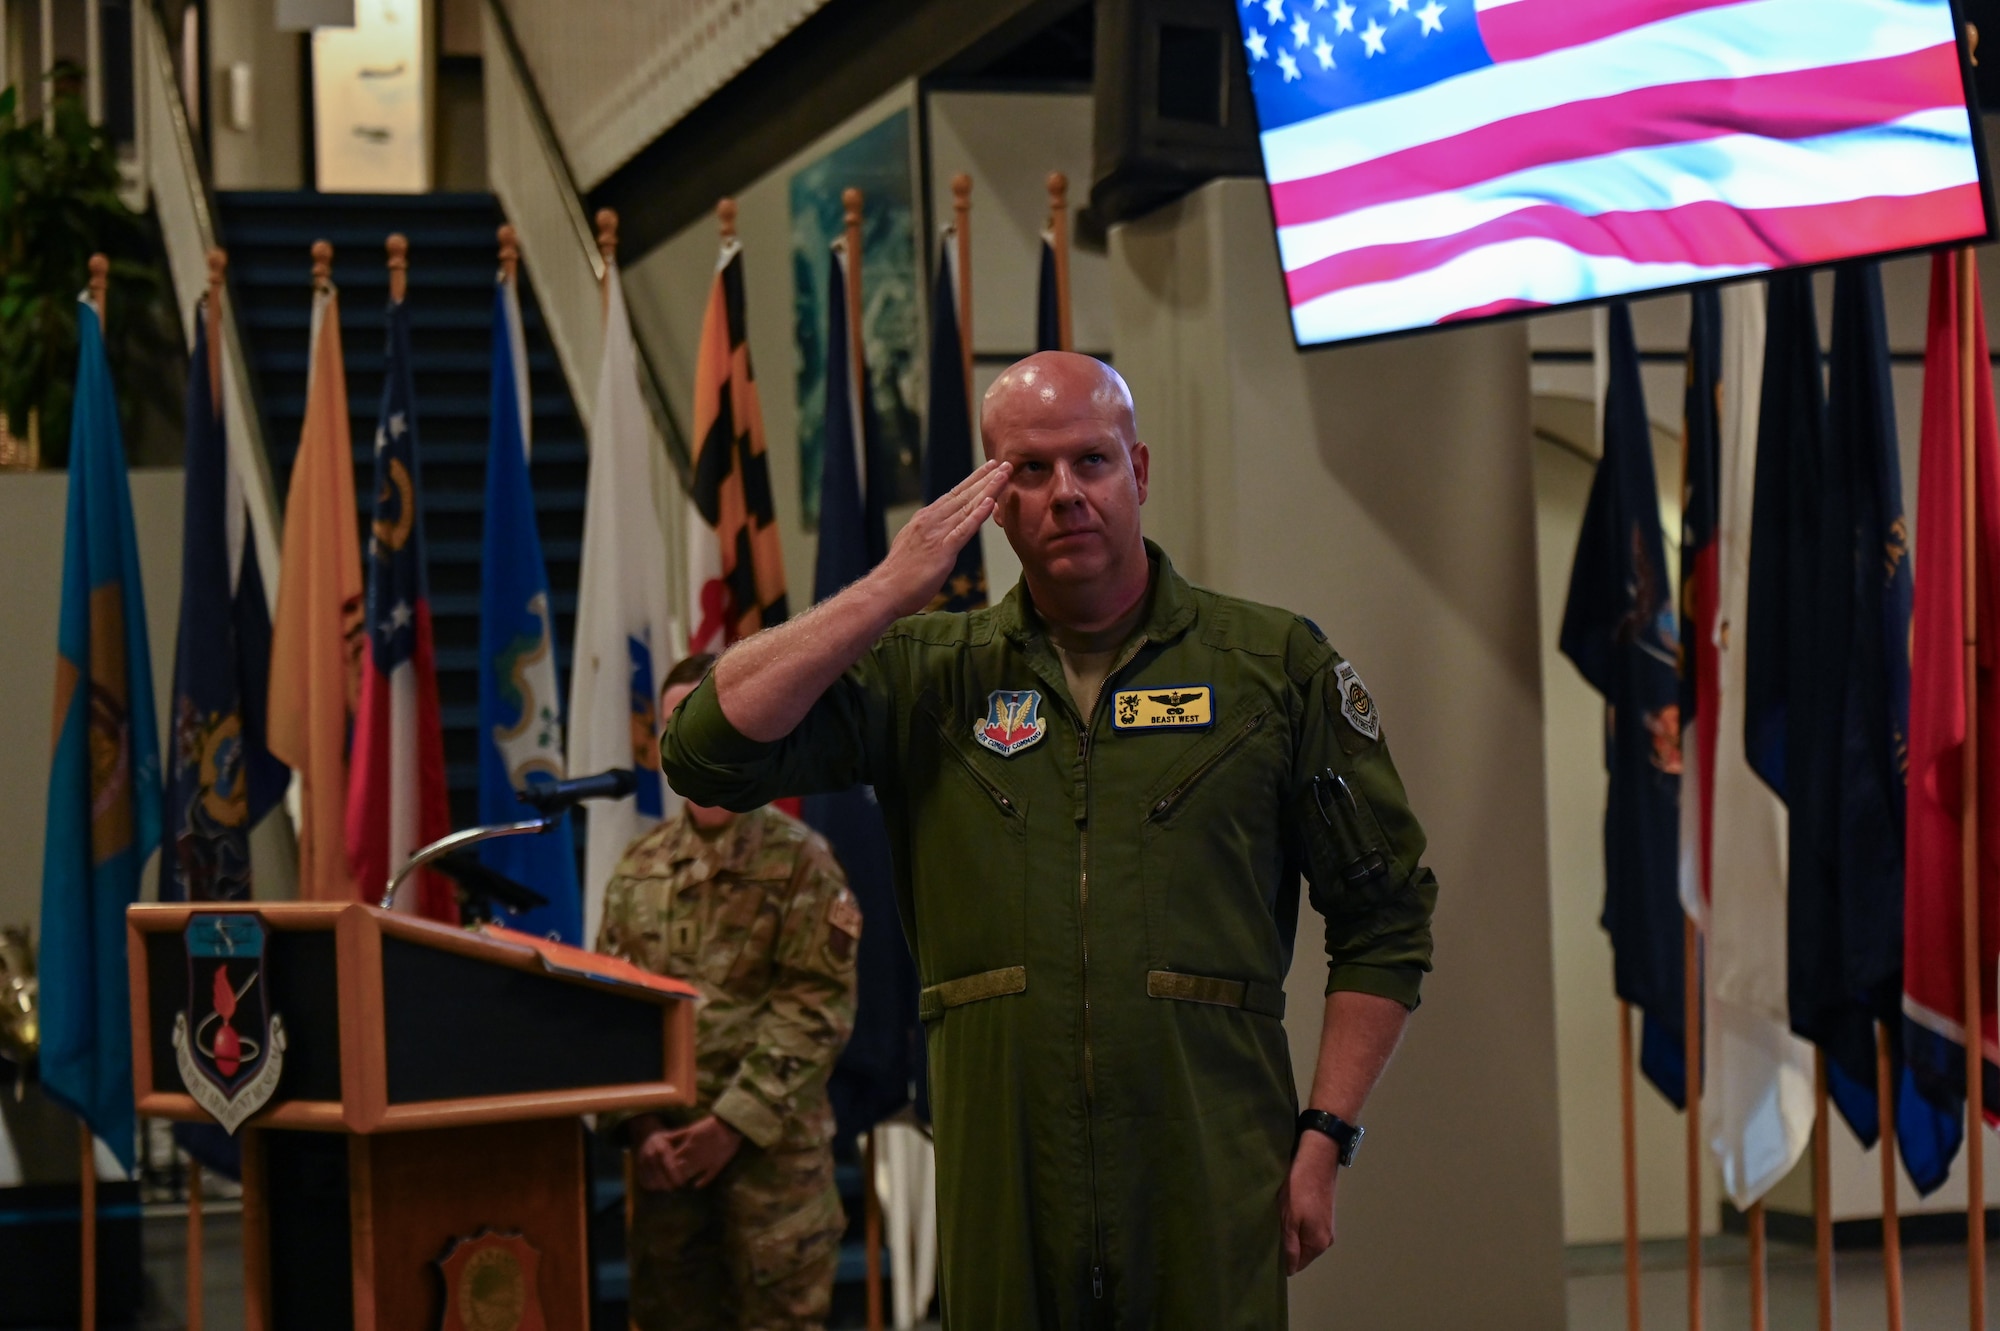 U.S. Air Force Lt. Col. Timothy West, 388th Electronic Warfare Squadron commander, gives the first salute to members of the 388th EWS during his assumption of command and a squadron reactivation ceremony at the U.S. Air Force Armament Museum, Eglin Air Force Base, Florida, May 2, 2024. The 388th EWS will serve to provide the 350th Spectrum Warfare Wing with education and training, weapons and tactics, intelligence support and test management. (U.S. Air Force photo by Capt. Benjamin Aronson)